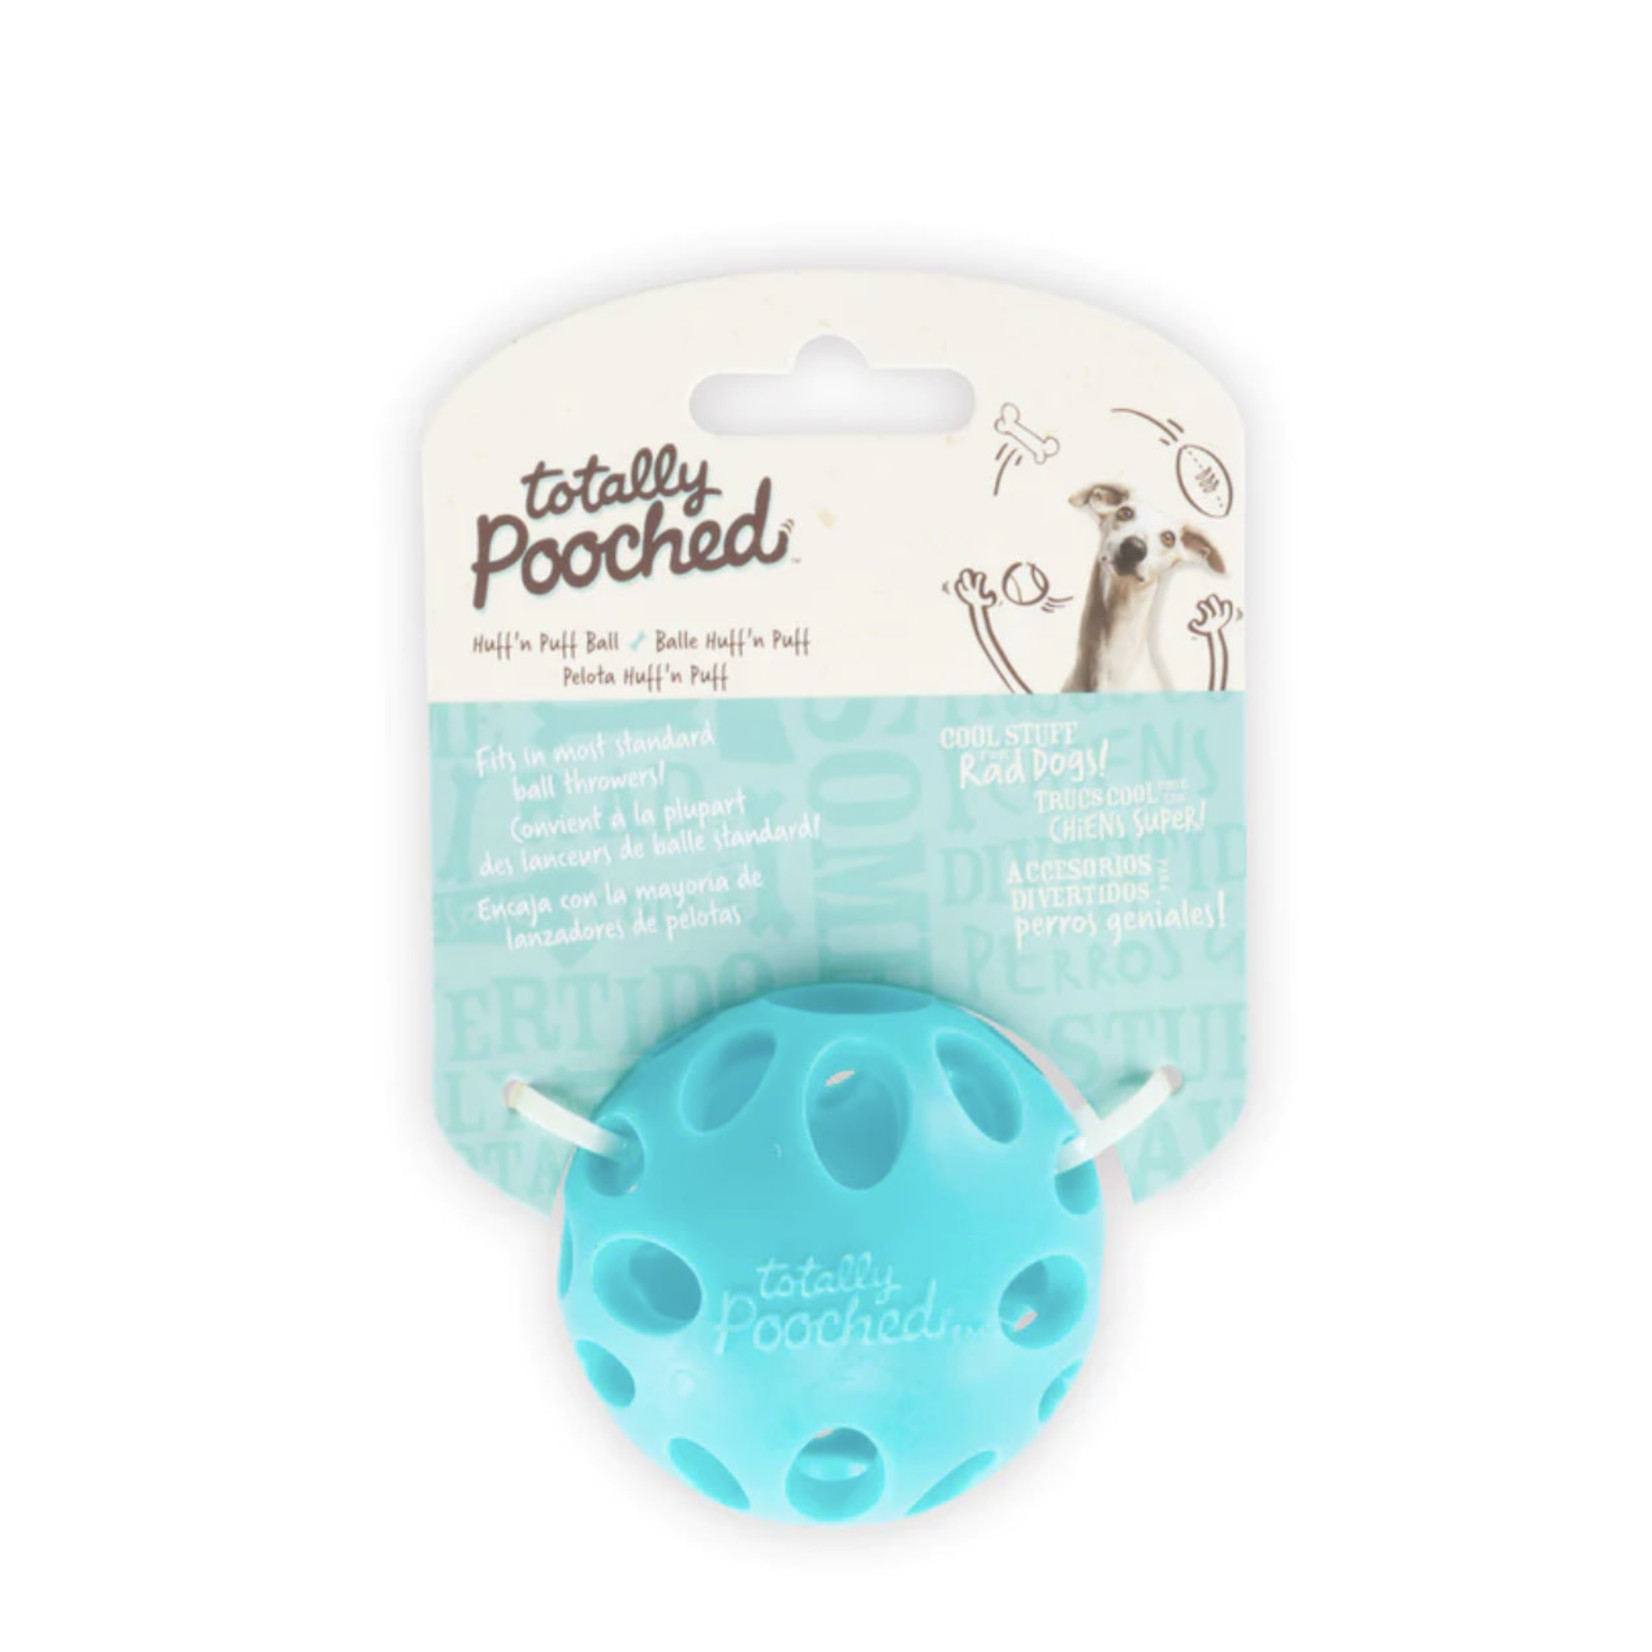 Totally Pooched Totally Pooched Dog Huff & Puff Ball Teal Small